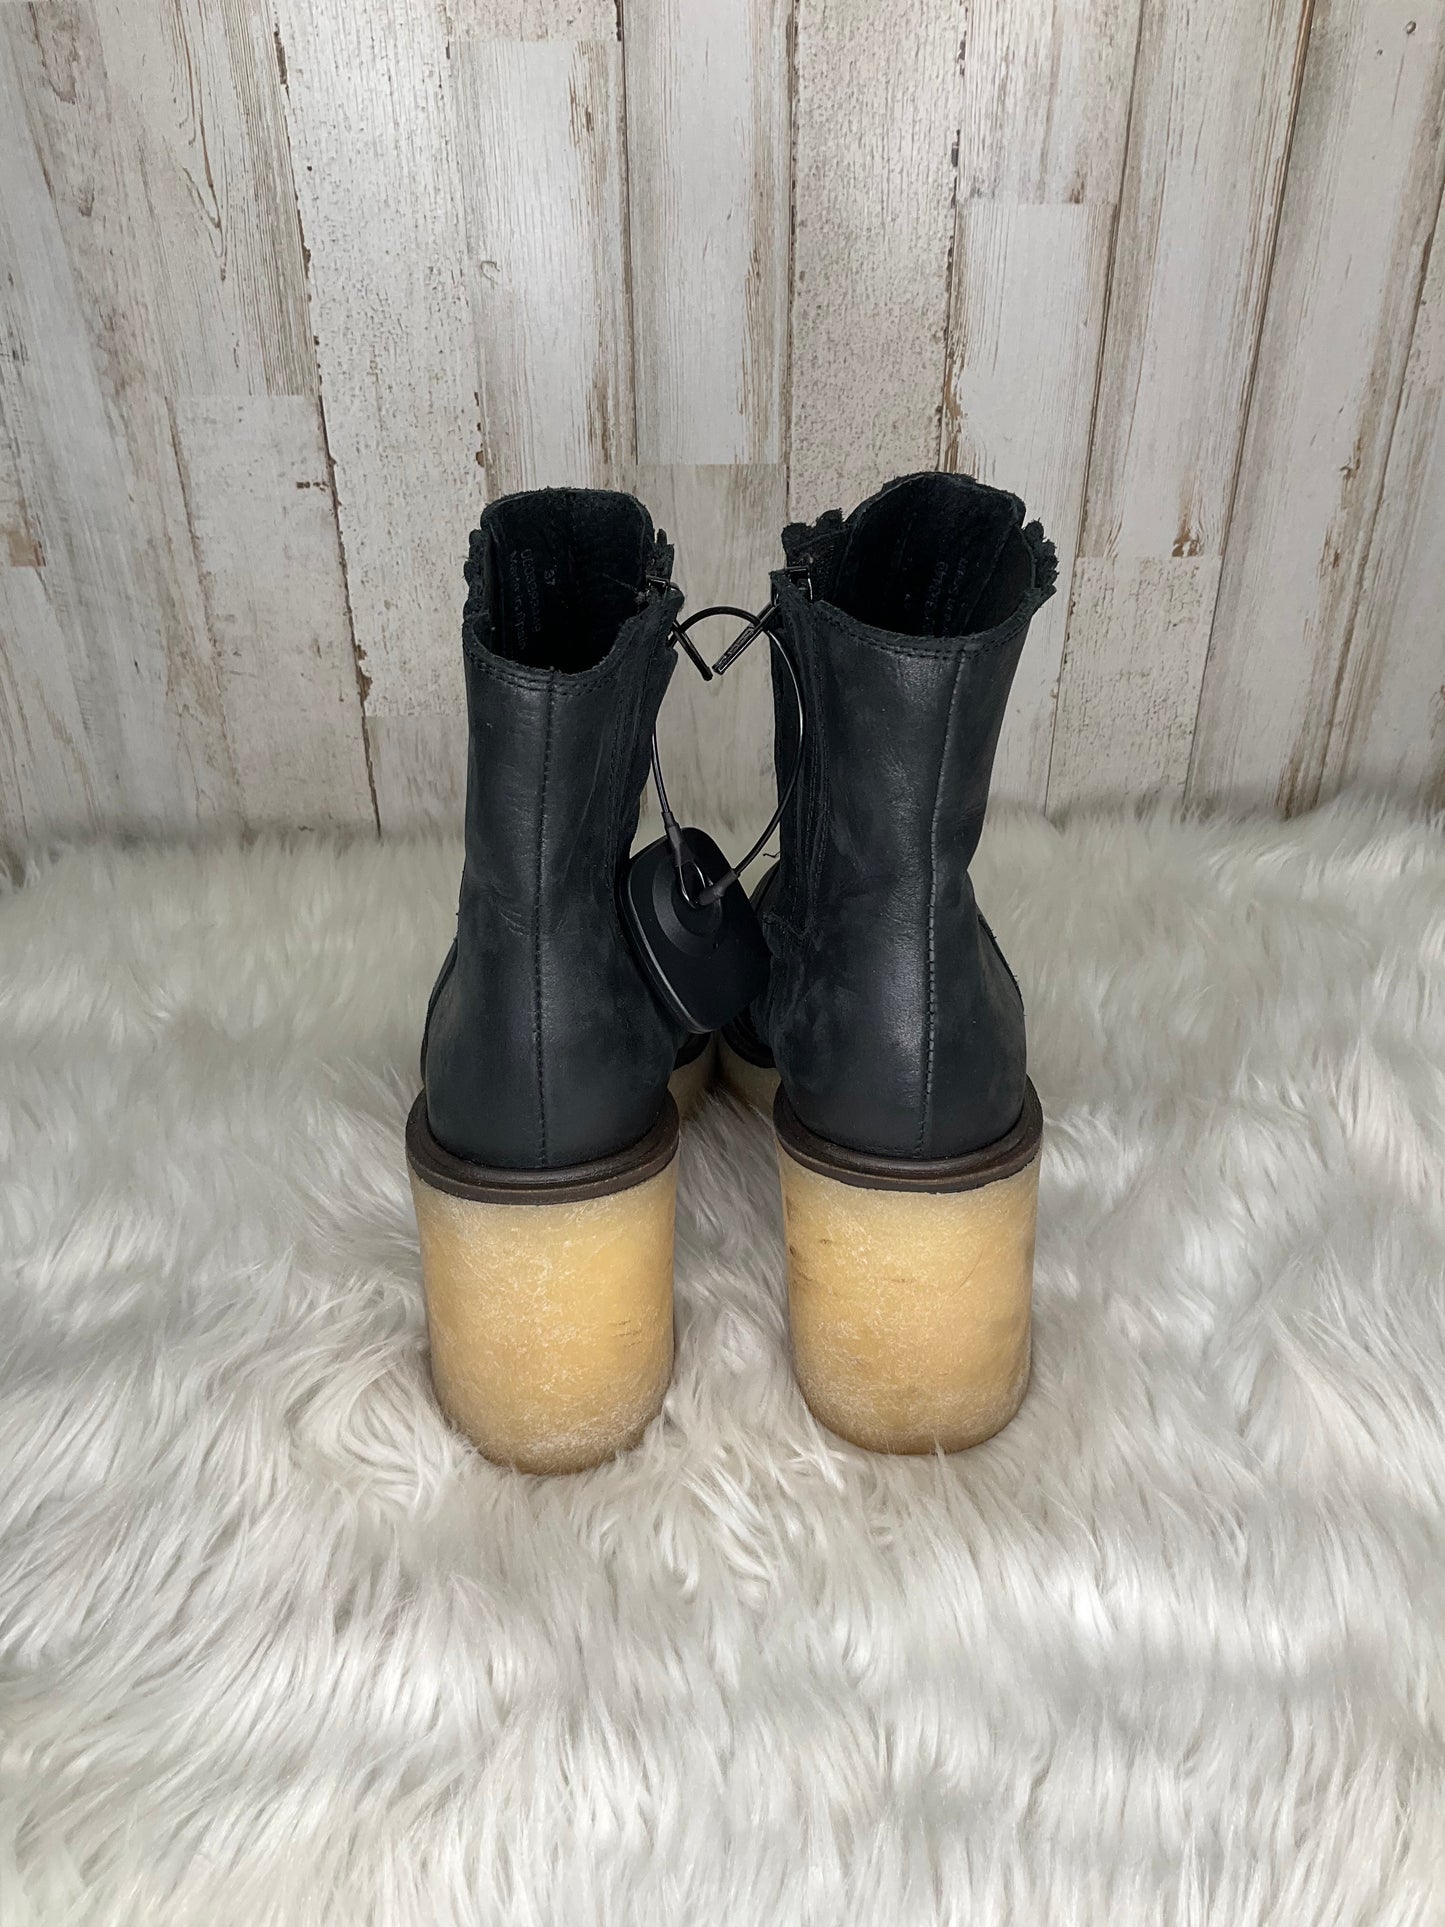 Black Boots Ankle Heels Free People, Size 6.5